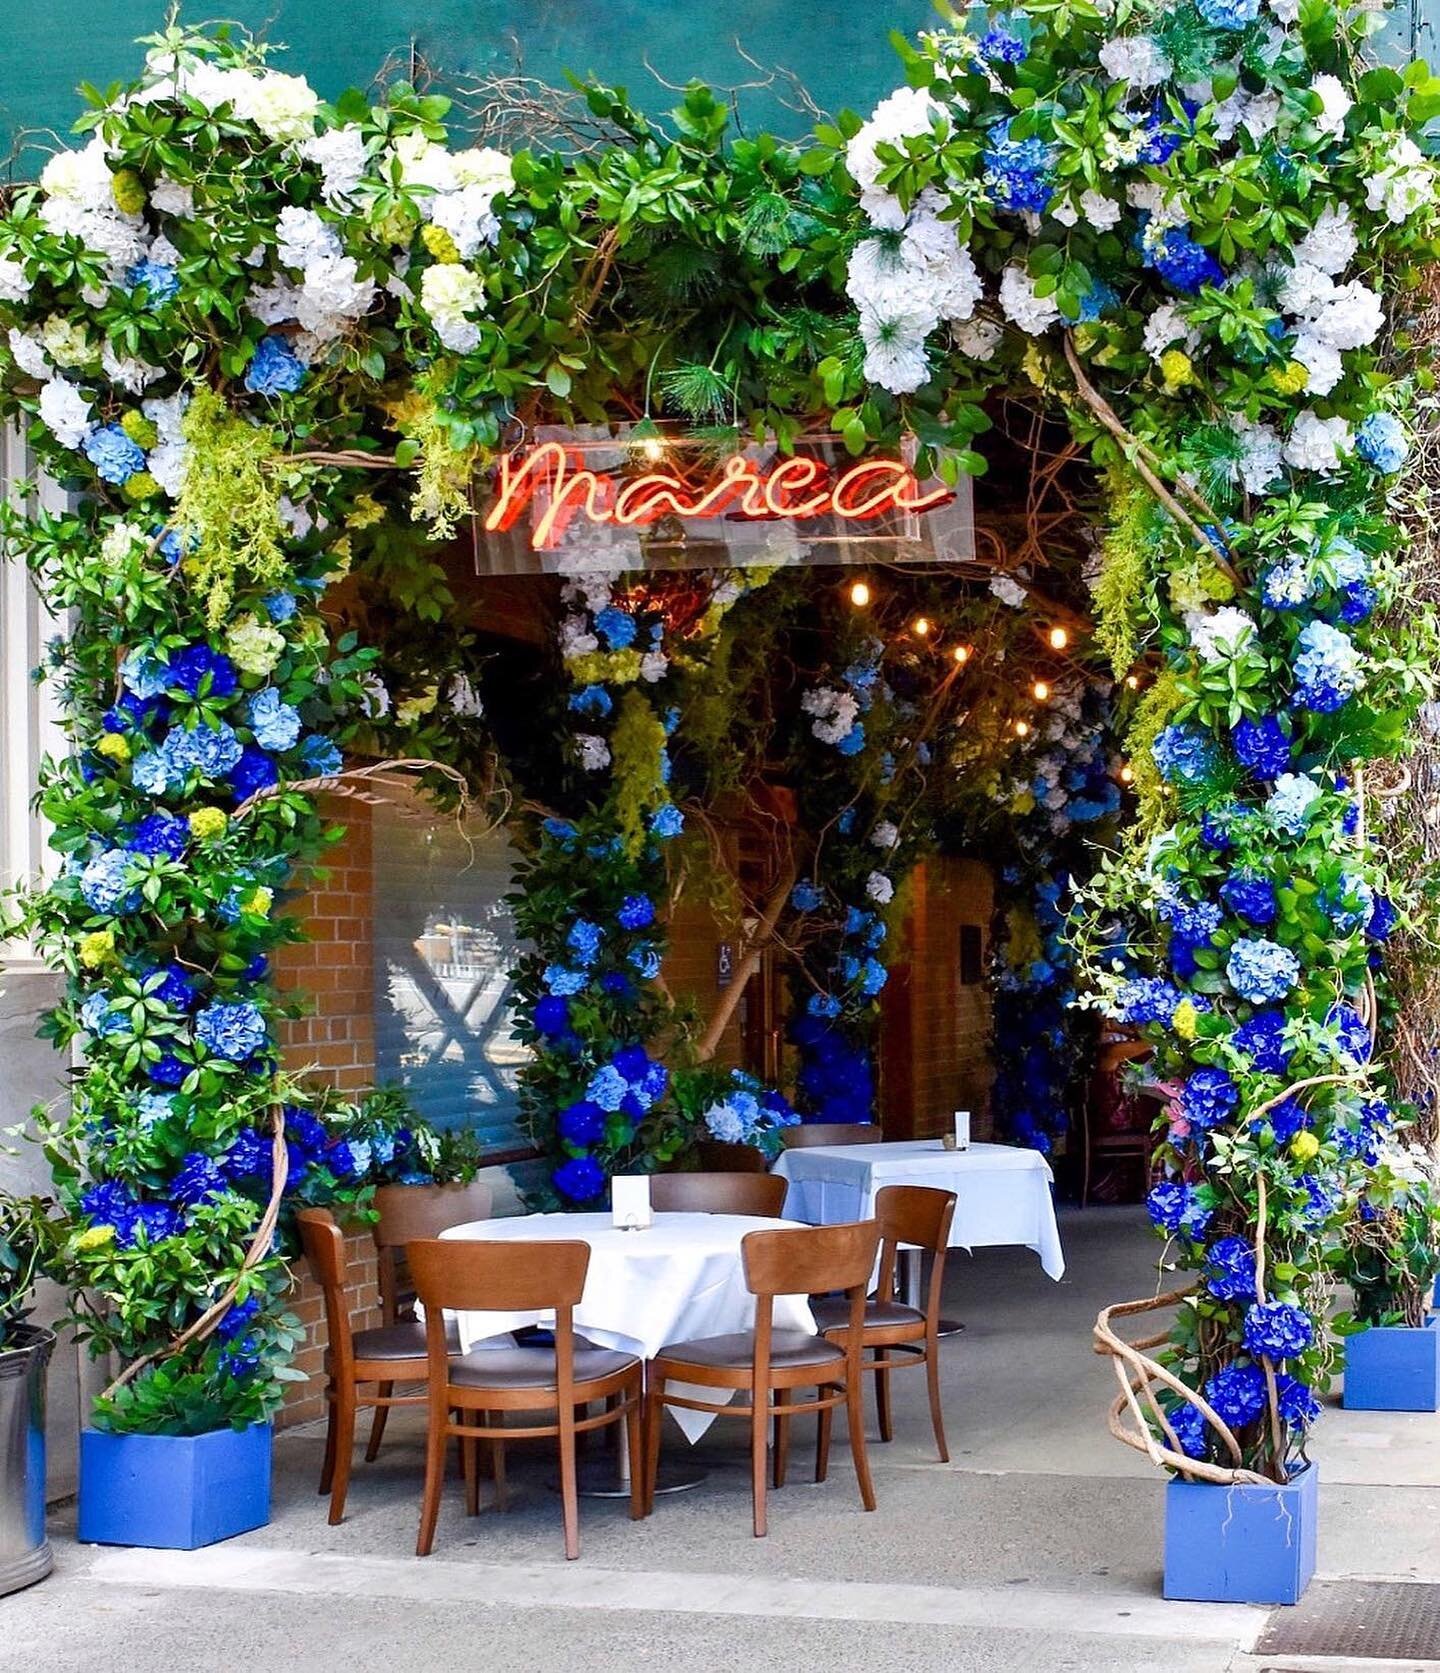 Midweek musings @mareanyc 💙
This glorious weather has me daydreaming about my recent visit to Marea. Curly willow branches and arched vines blooming with colorful silk flowers have completely transformed the scaffolding in front of midtown&rsquo;s M